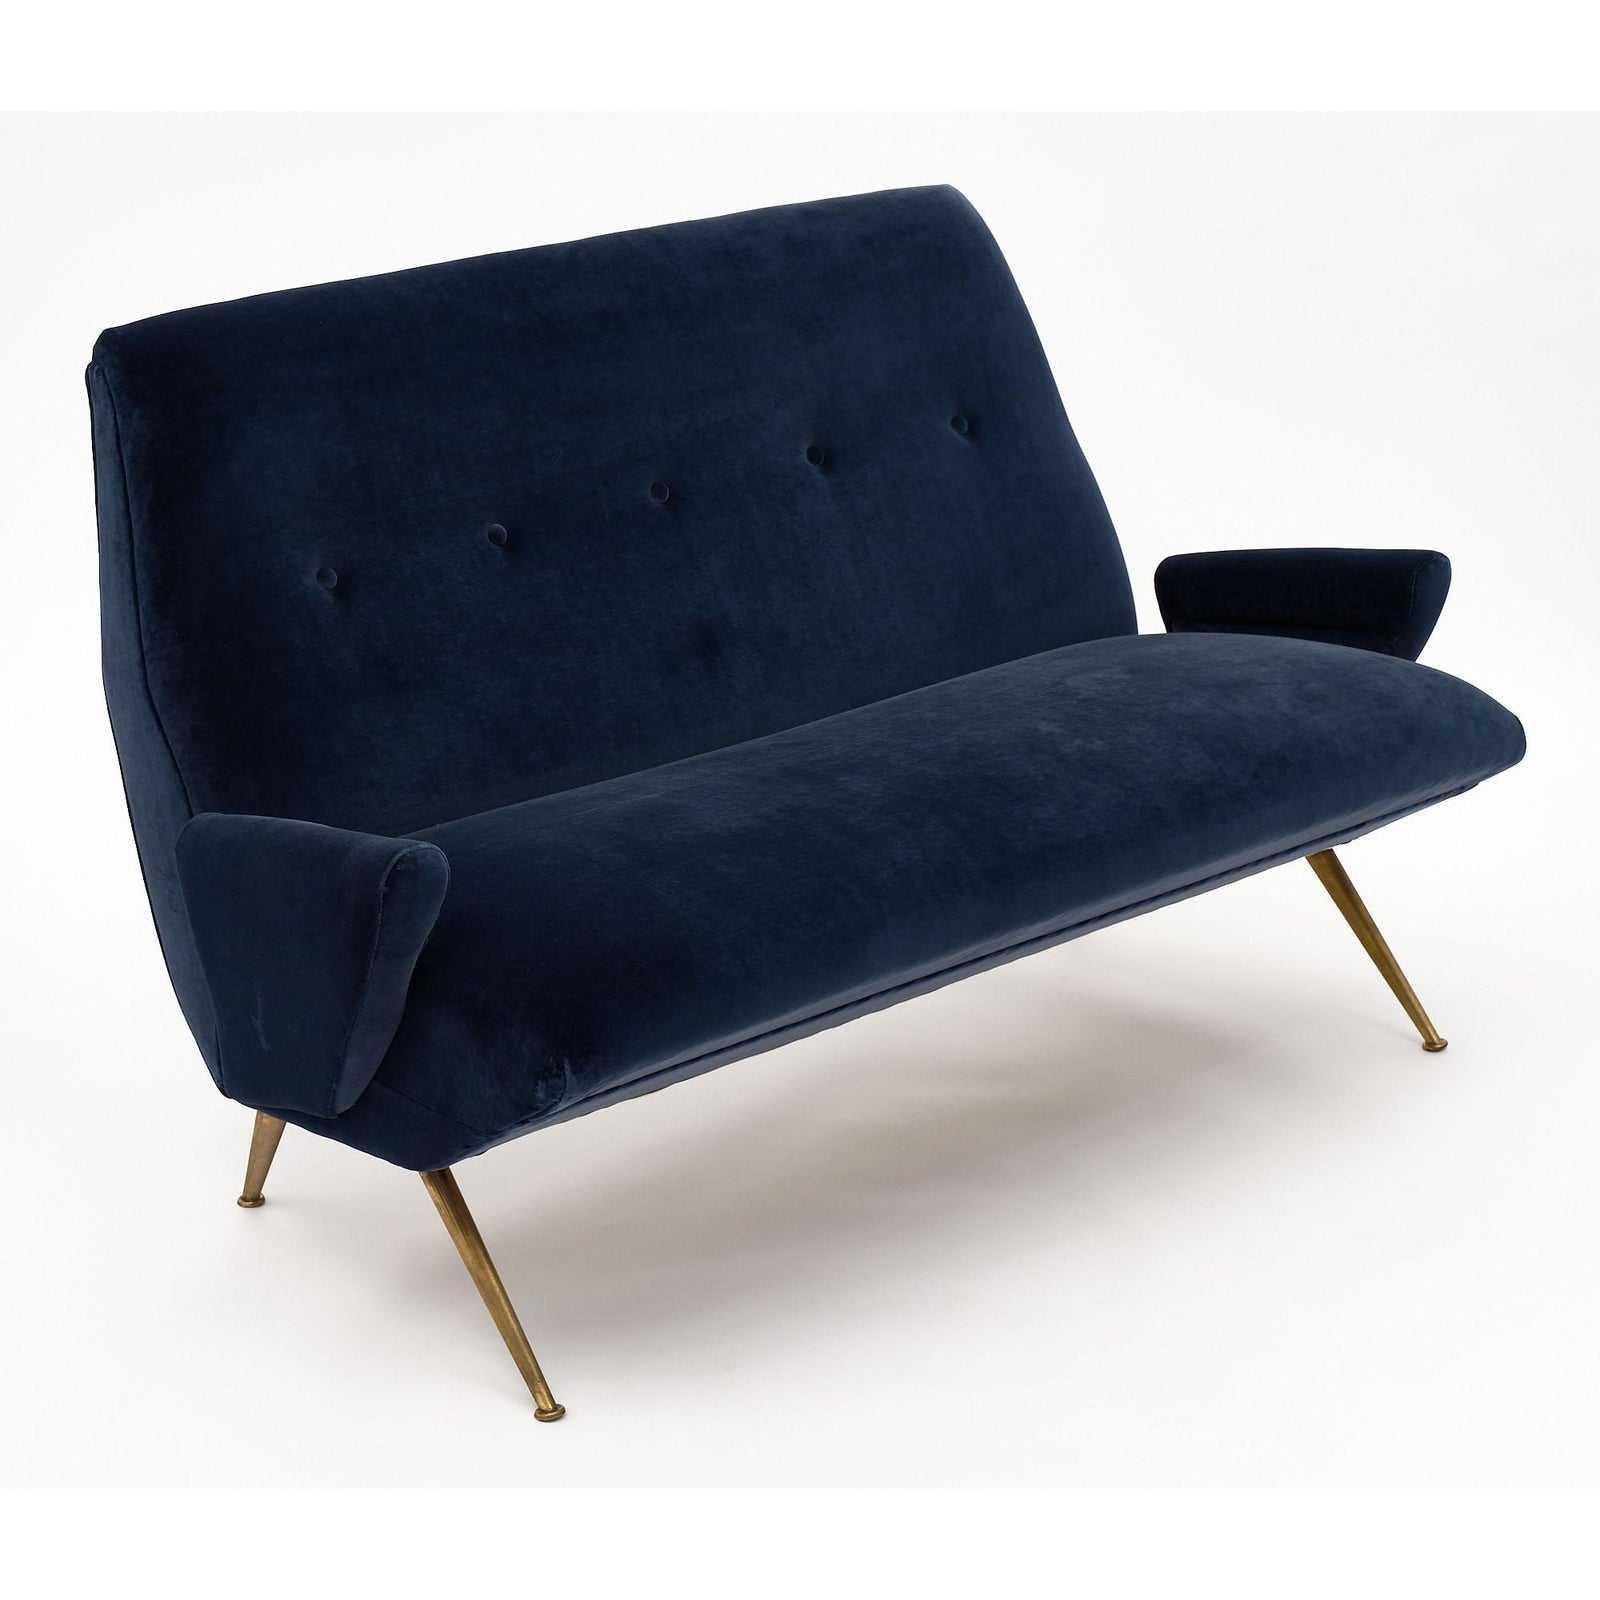 This Italian pair of armchairs and sofa was designed by Nino Zoncada in the 1950s. They have armrests and have been reupholstered in blue velvet. The body of the furniture is supported by brass legs. Both pieces of furniture are in relatively good,